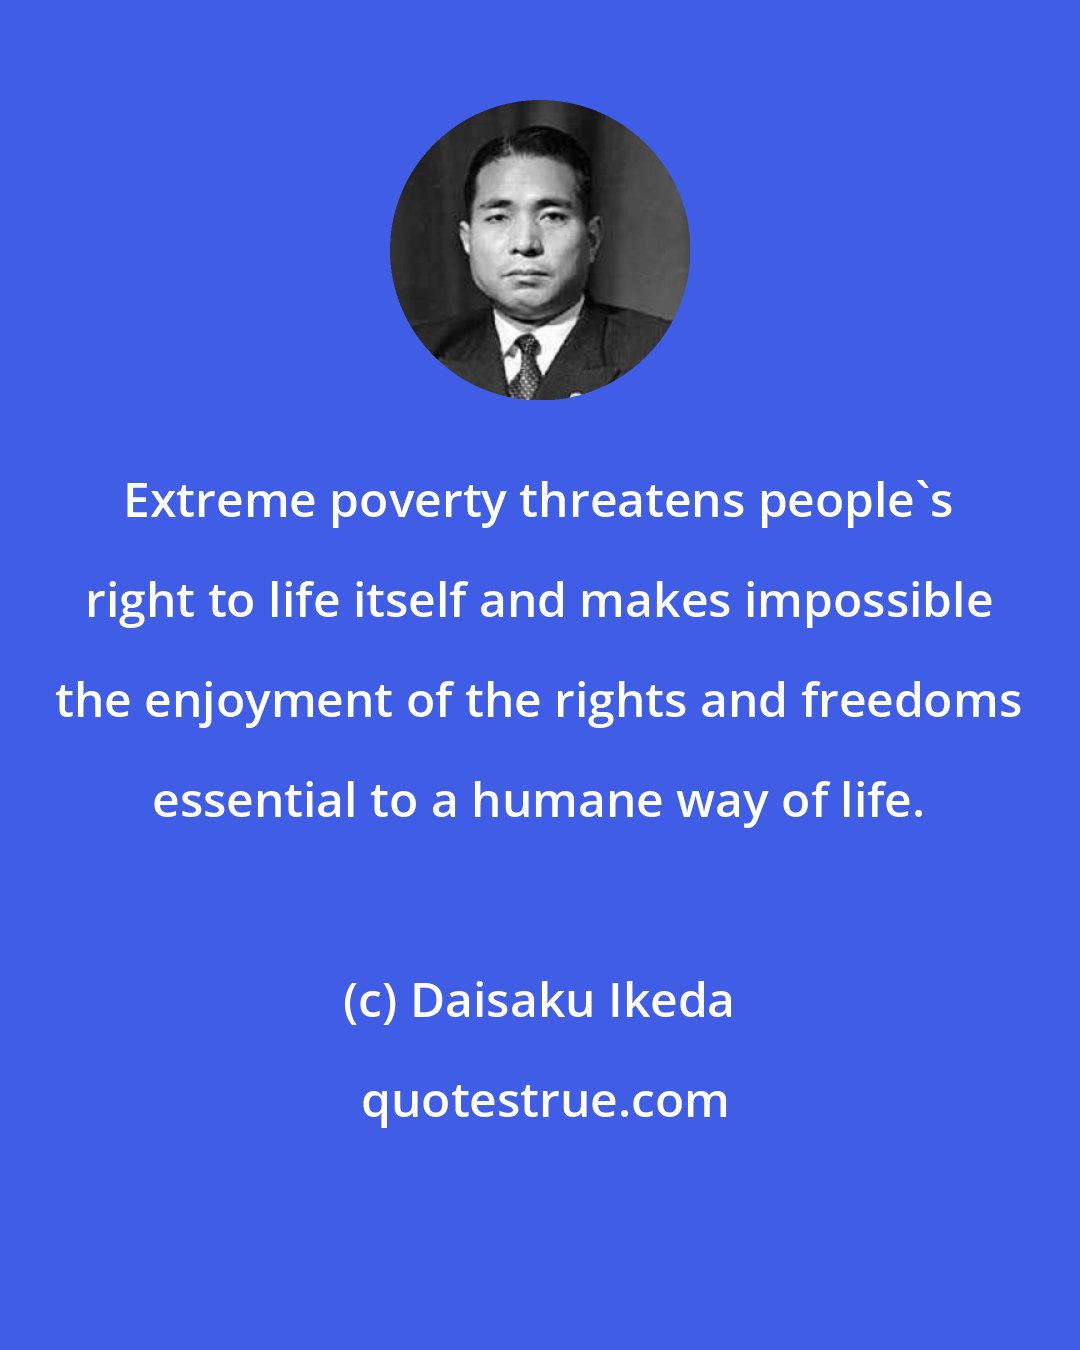 Daisaku Ikeda: Extreme poverty threatens people's right to life itself and makes impossible the enjoyment of the rights and freedoms essential to a humane way of life.